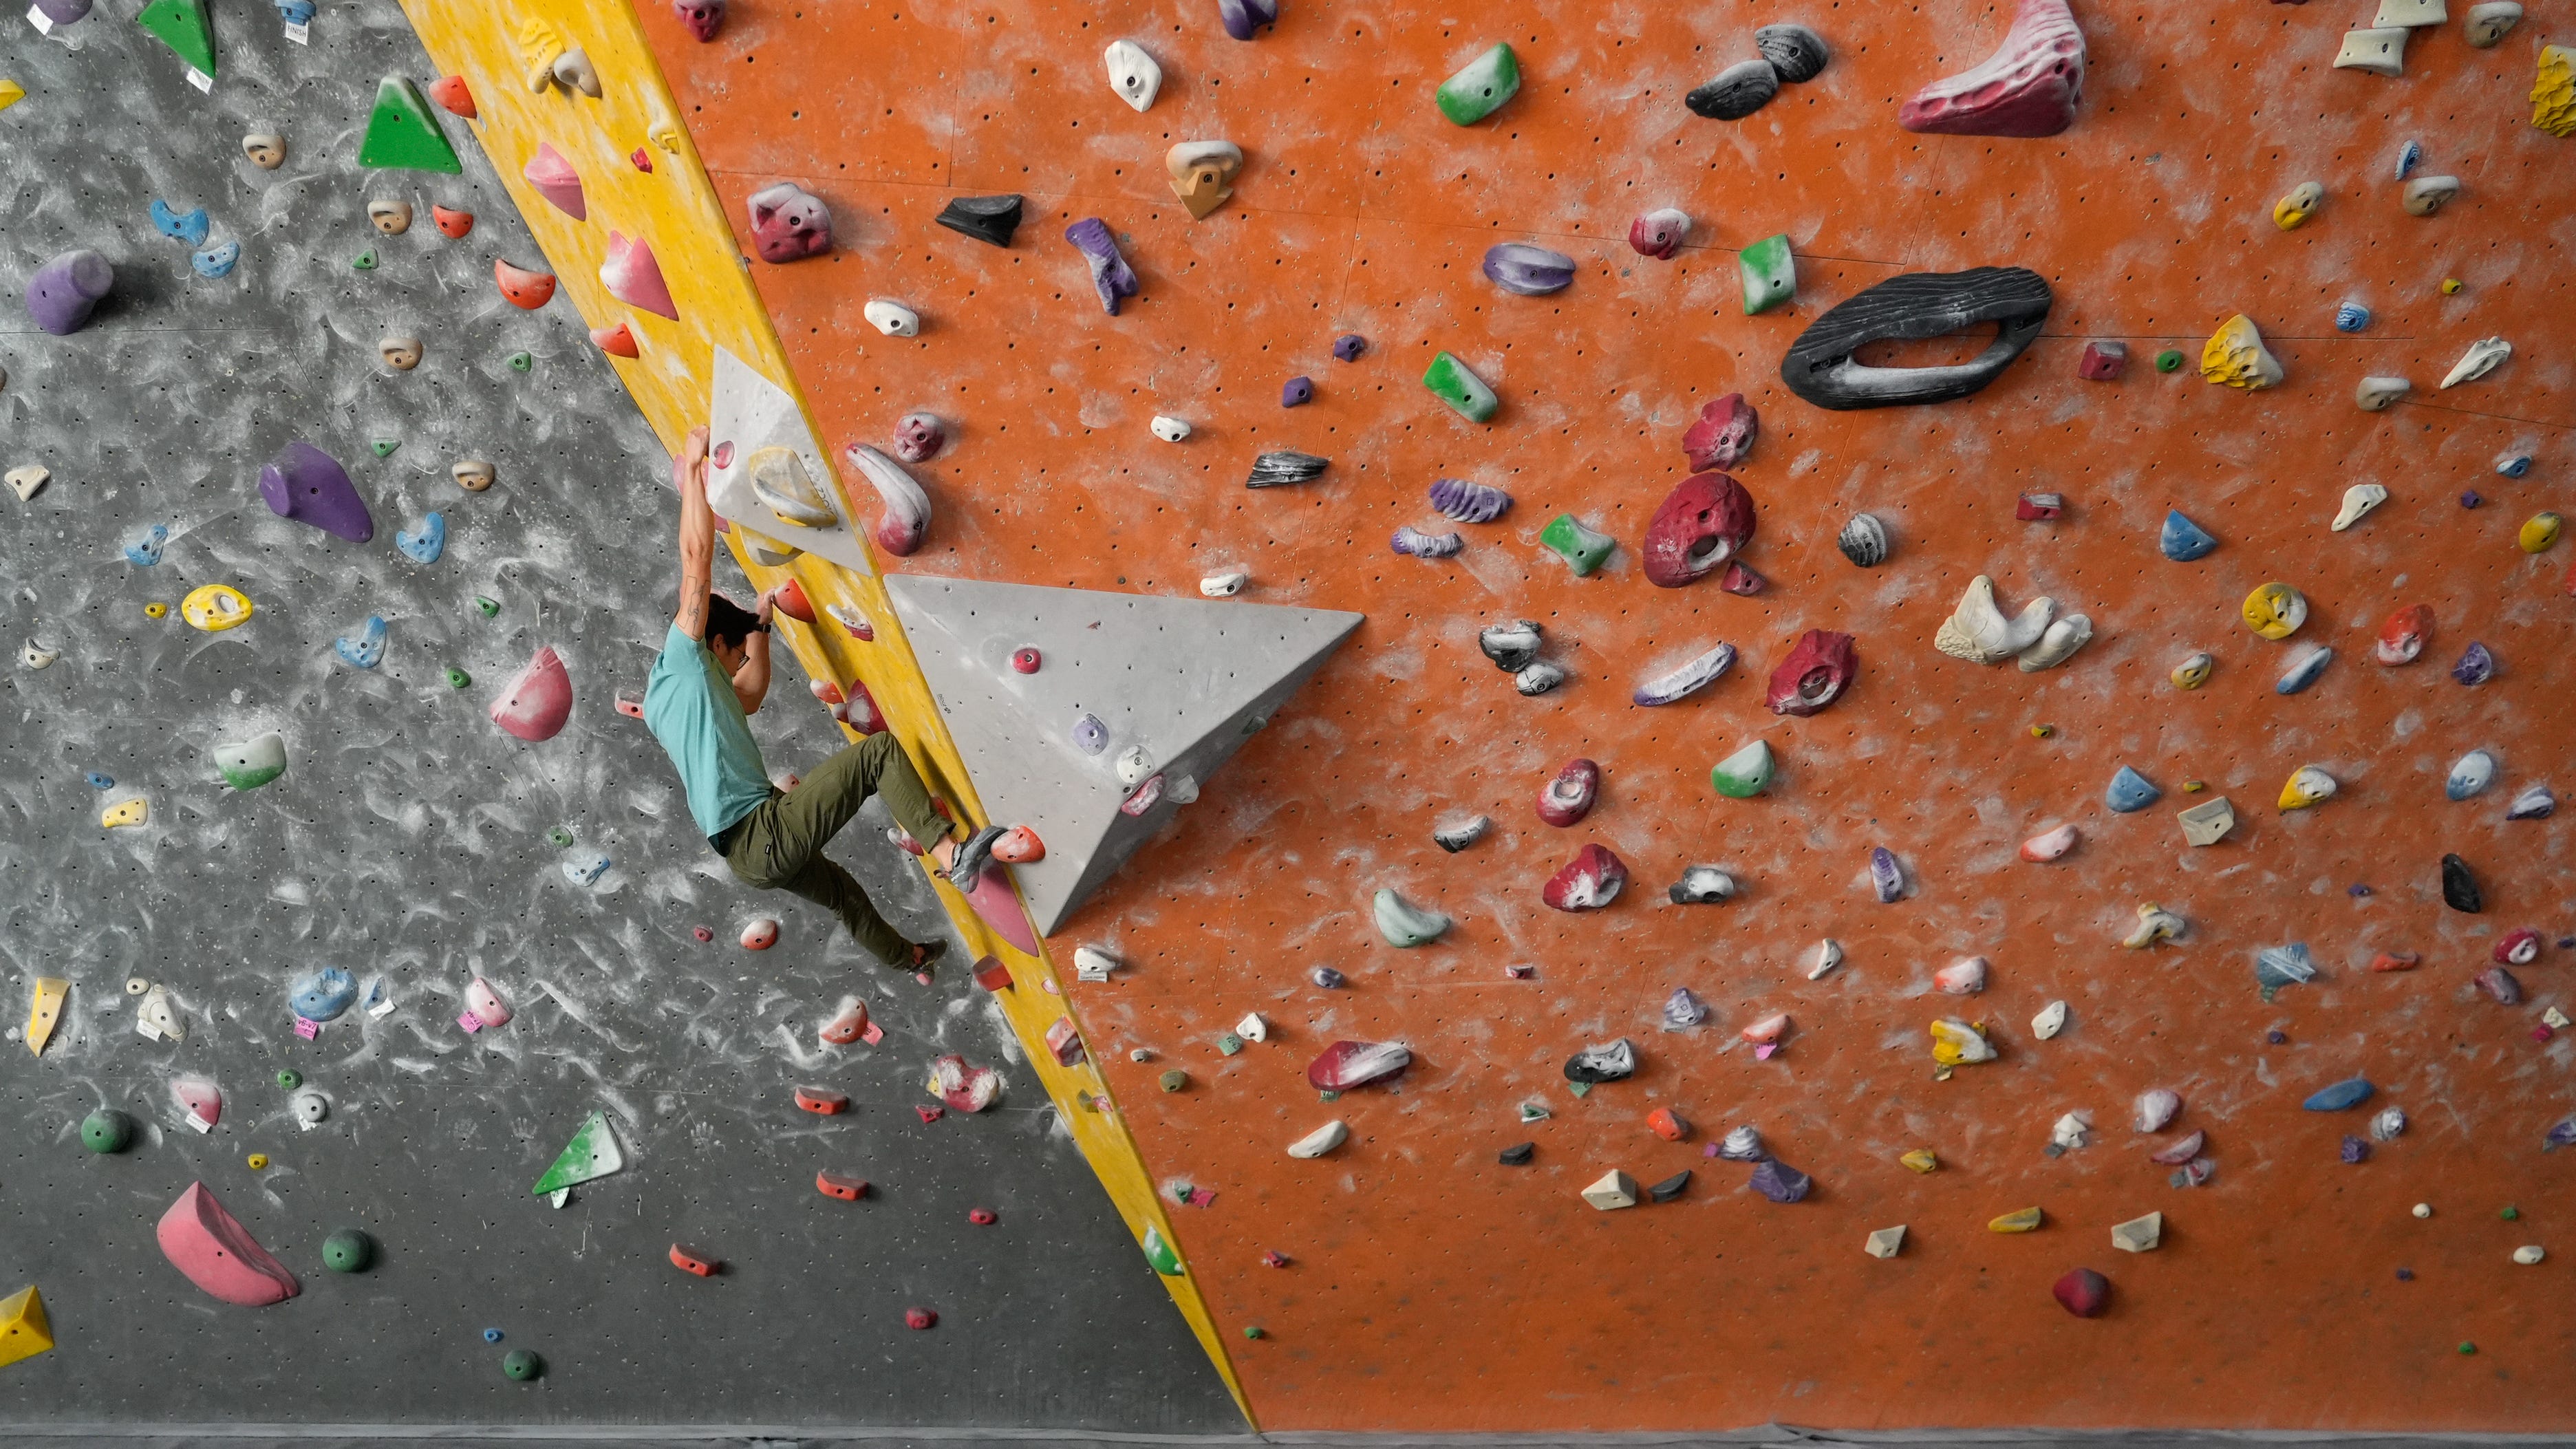 Louisville climber hopes to inspire other transgender athletes to reach new heights